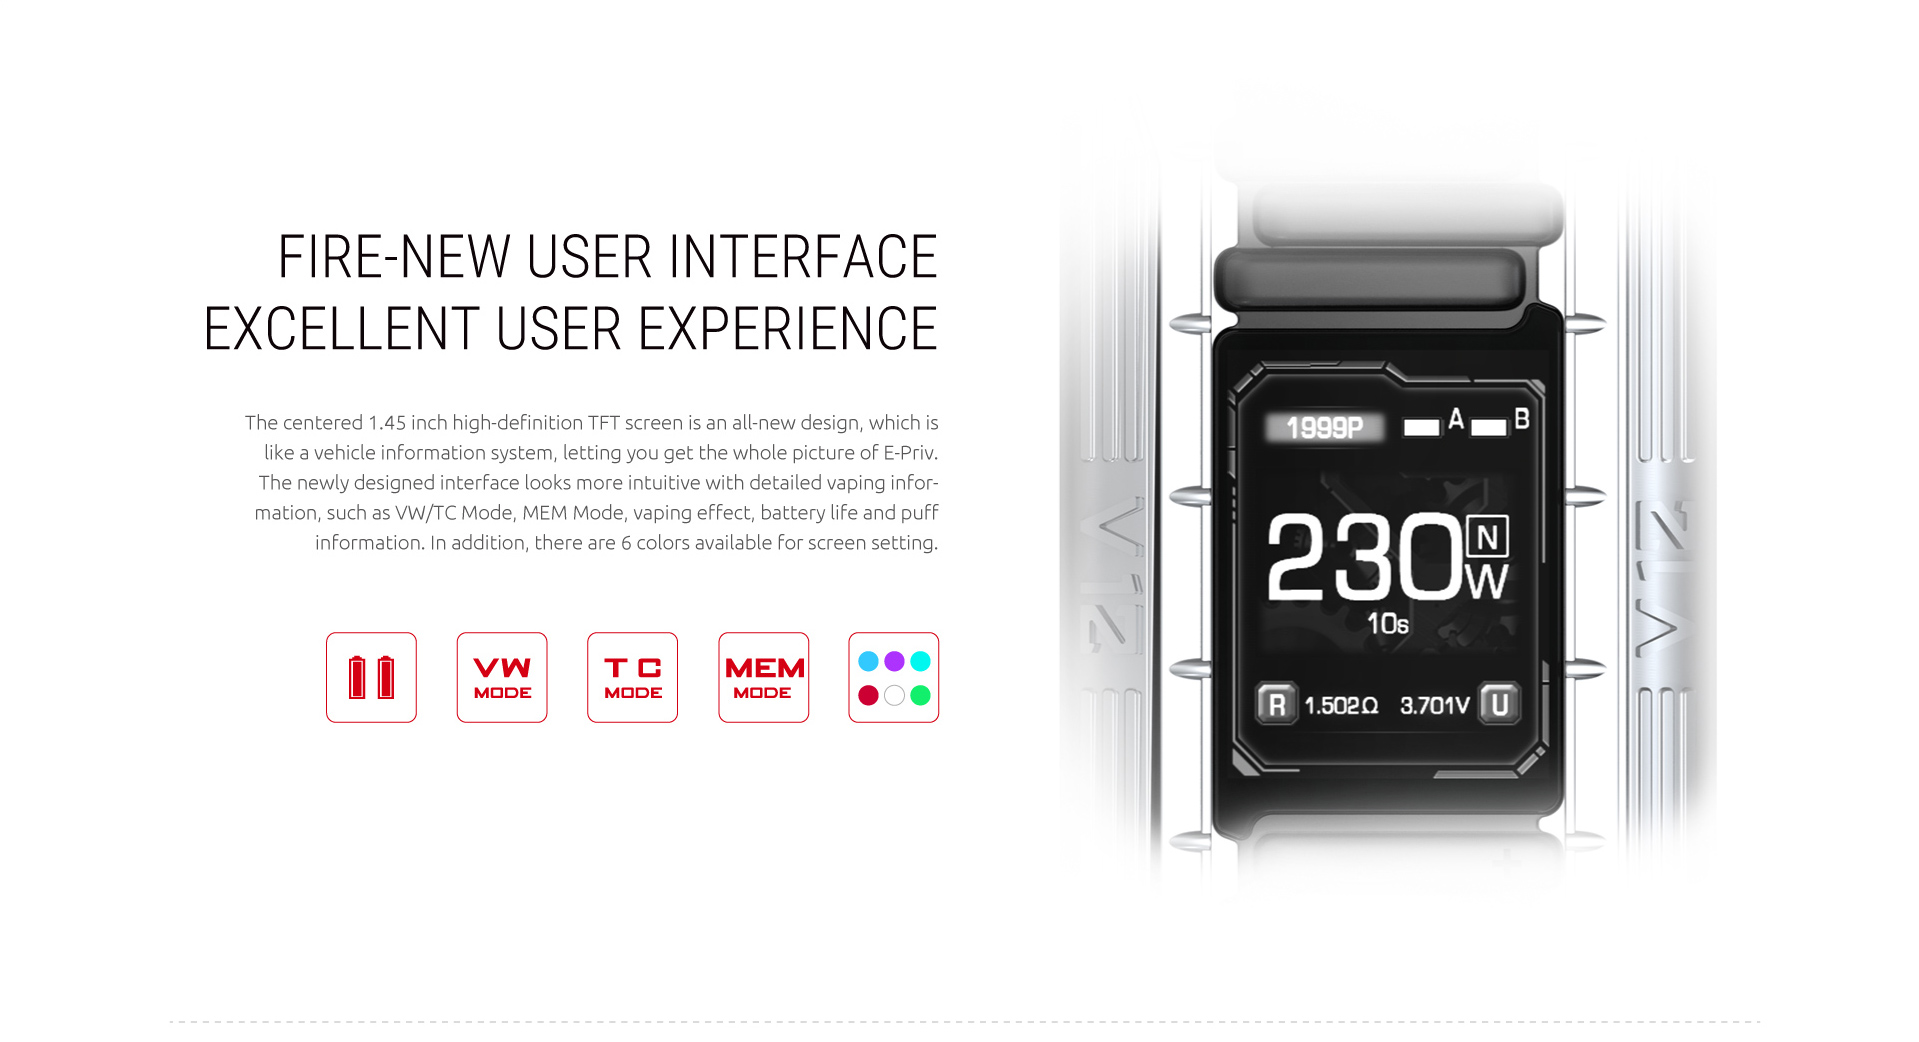 Fire-New User Interface Excellent User Experience - SMOK E-Priv Kit